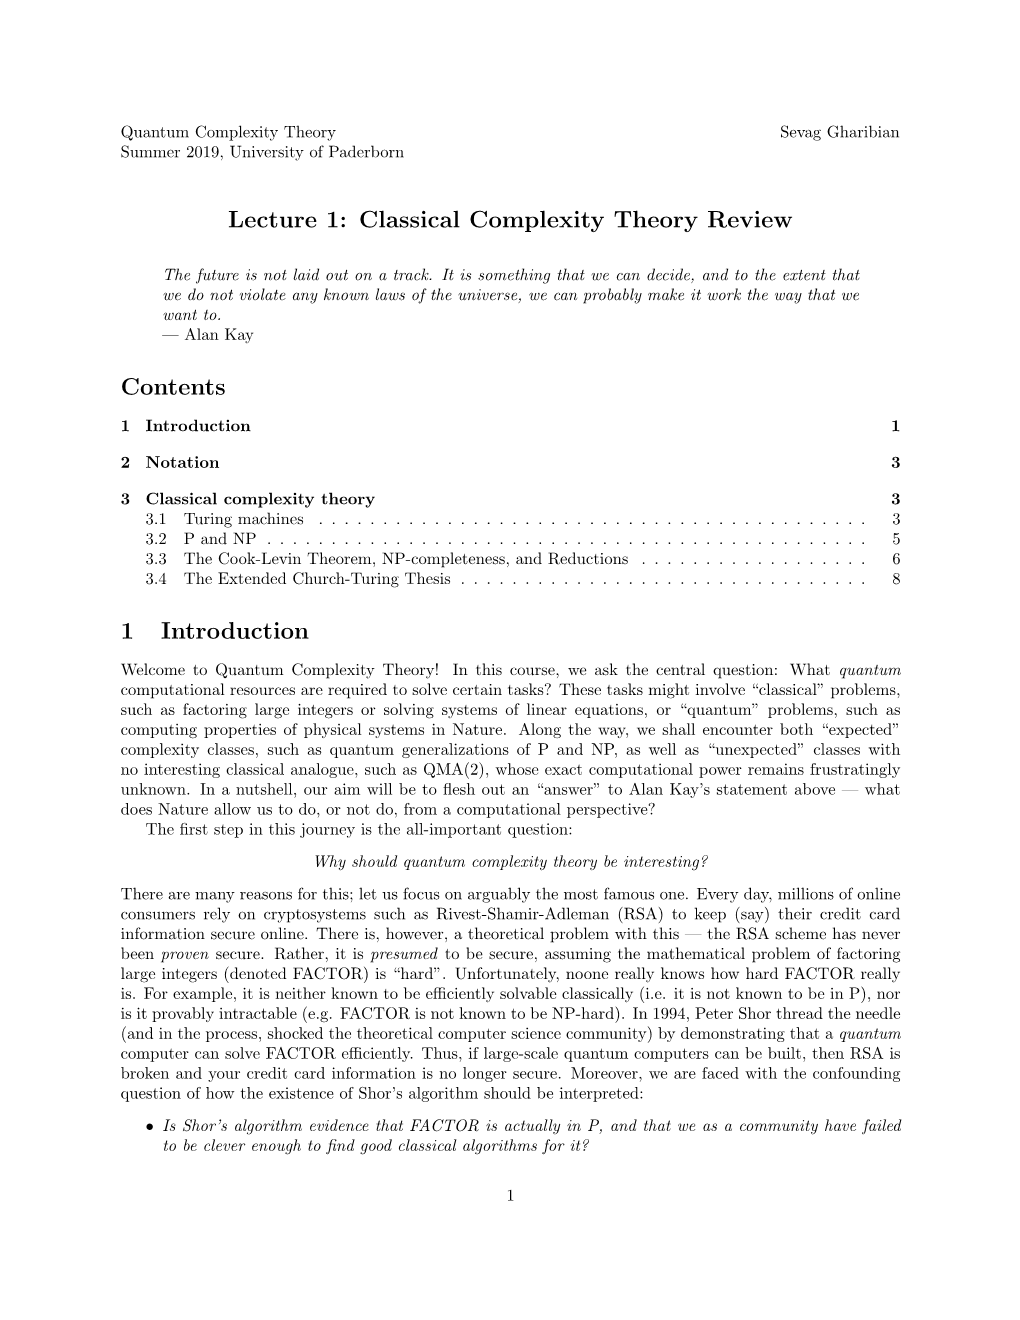 Lecture 1: Classical Complexity Theory Review Contents 1